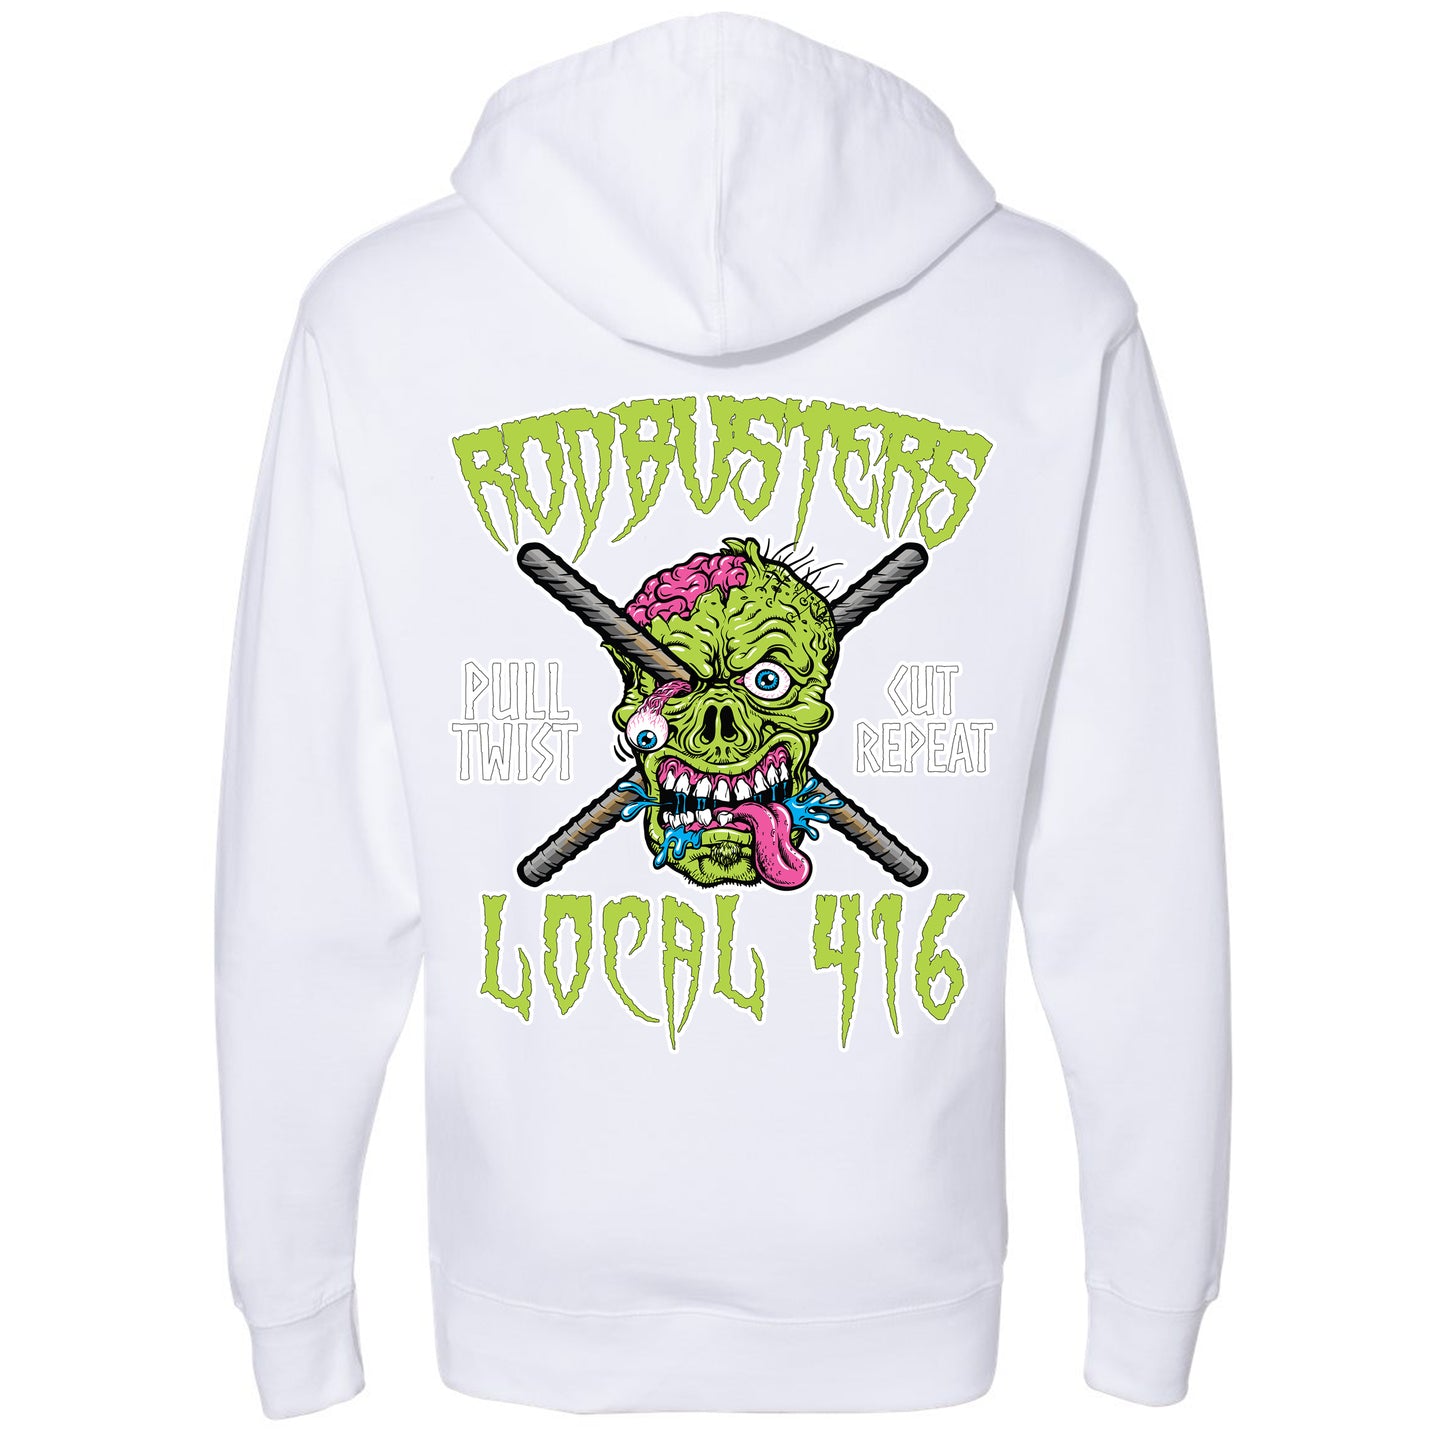 RODBUSTER ZOMBIE PULLOVER HOODIE LOCAL 416